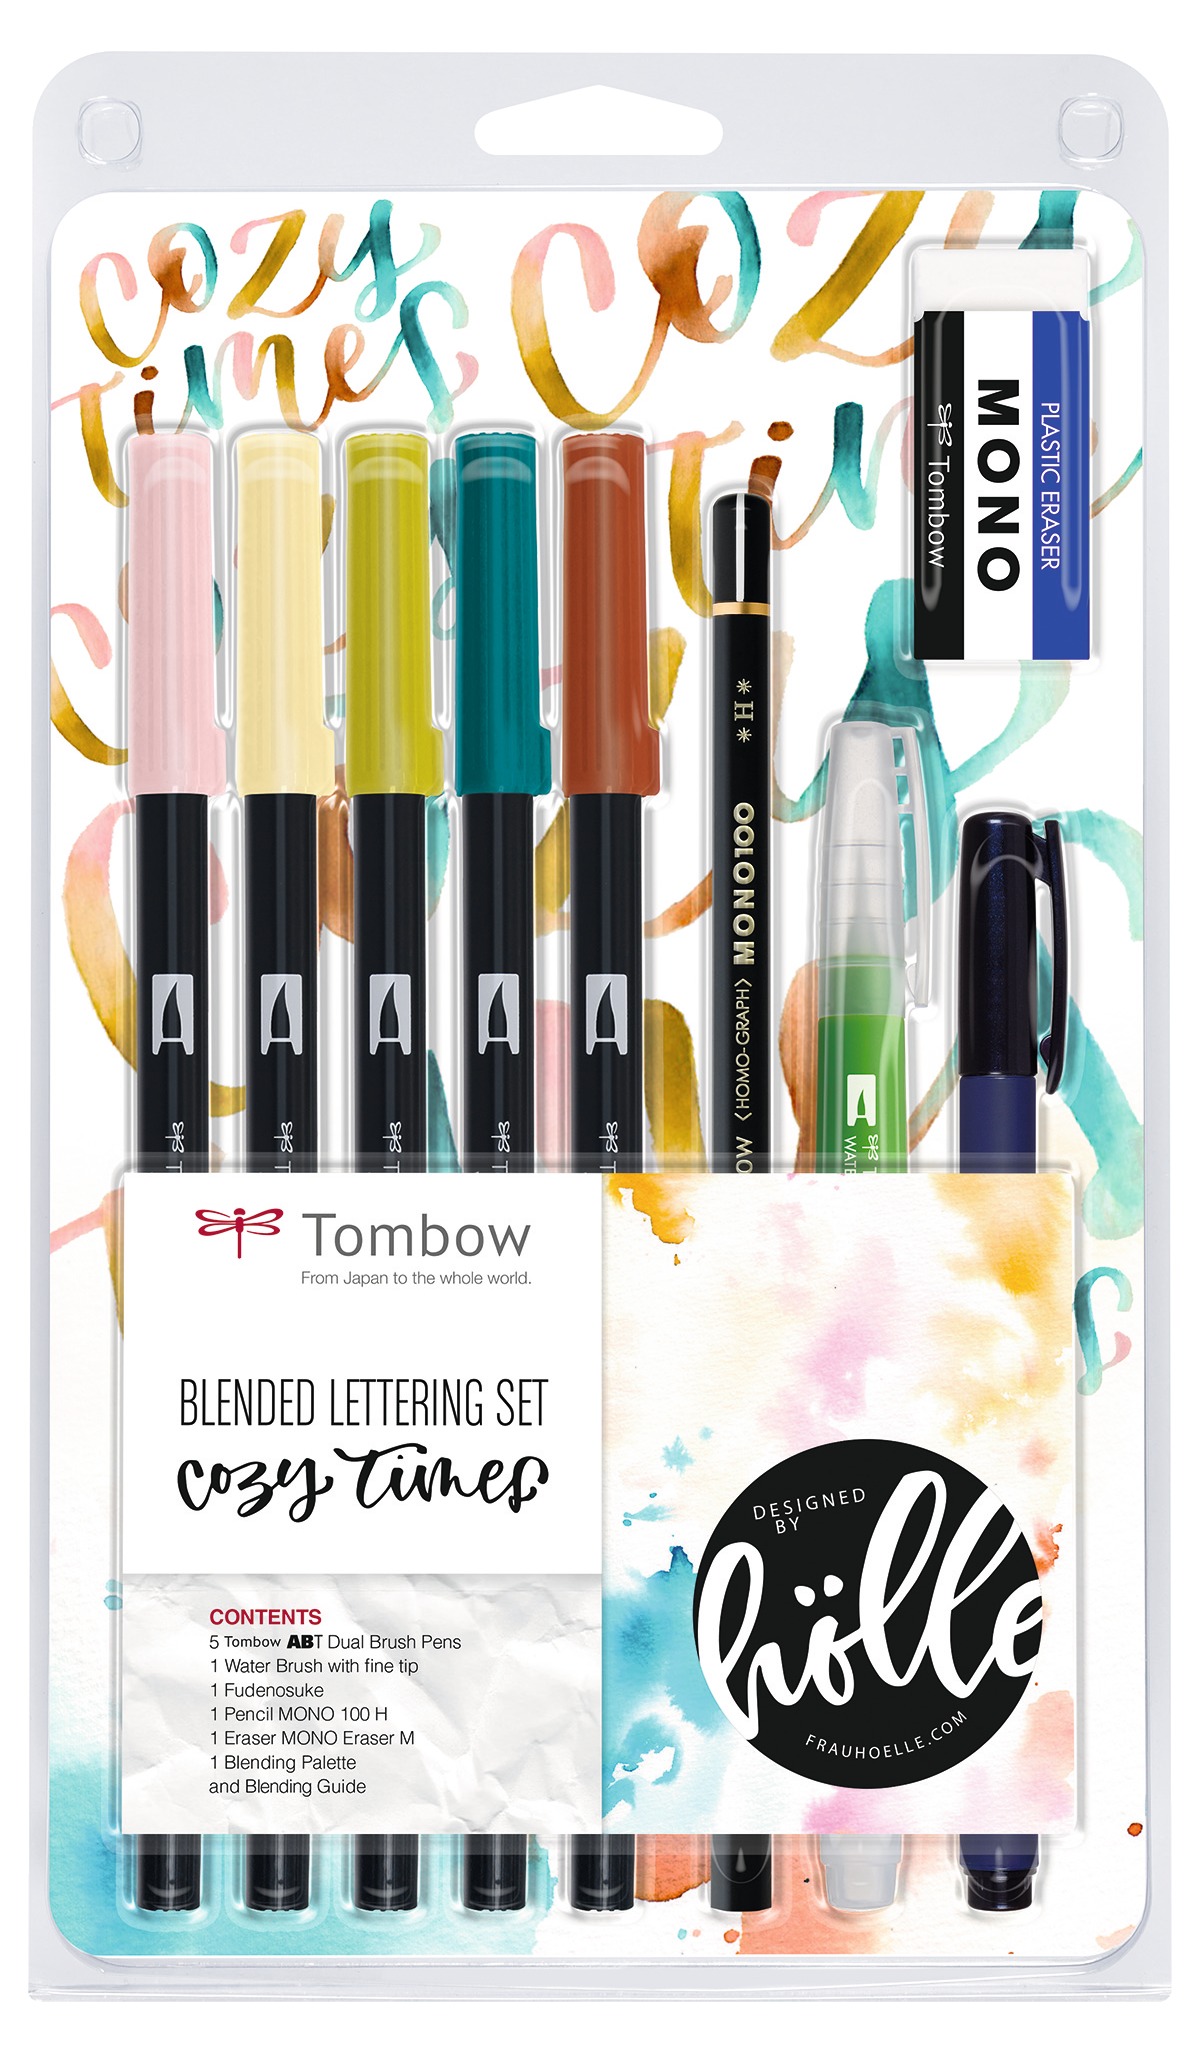 LIBRO_Tombow Blended Lettering Set, Cozy Times_€29,99